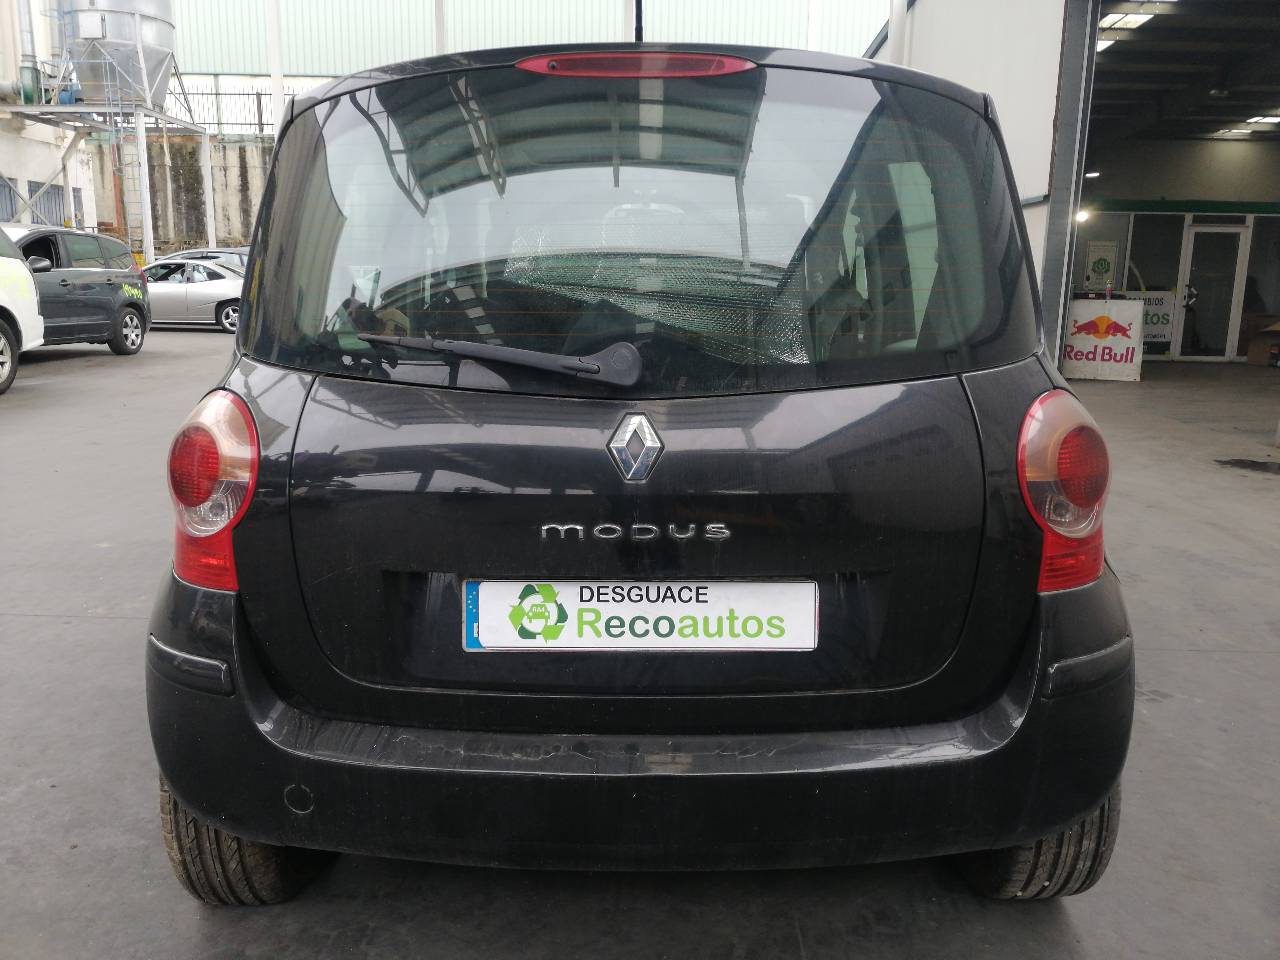 RENAULT Modus 1 generation (2004-2012) Other Control Units 8200033686, 21591287 24206634